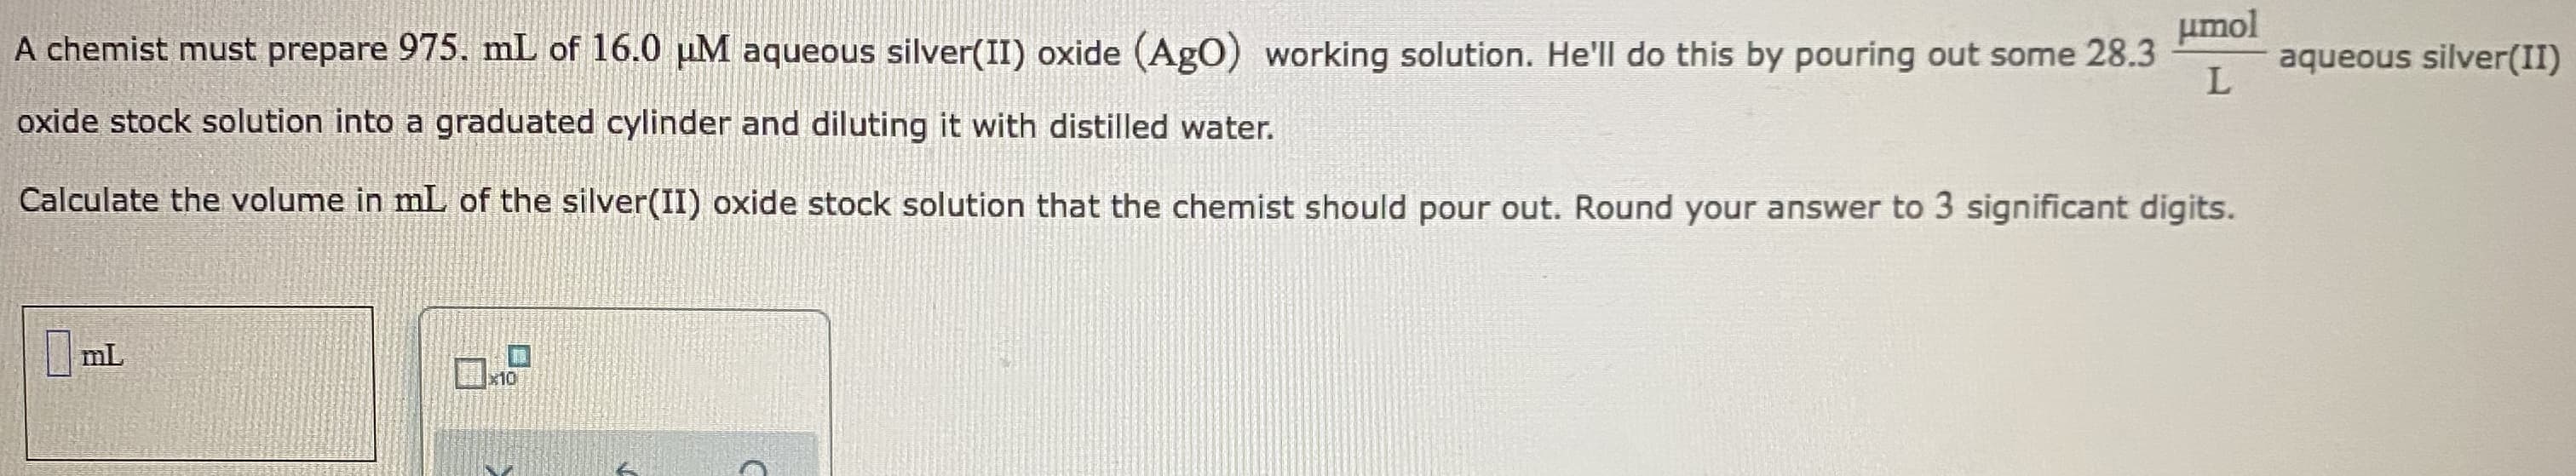 umol
A chemist must prepare 975. mL of 16.0 µM aqueous silver(II) oxide (AgO) working solution. He'll do this by pouring out some 28.3
aqueous silver(II)
oxide stock solution into a graduated cylinder and diluting it with distilled water.
Calculate the volume in mL of the silver(II) oxide stock solution that the chemist should pour out. Round your answer to 3 significant digits.
